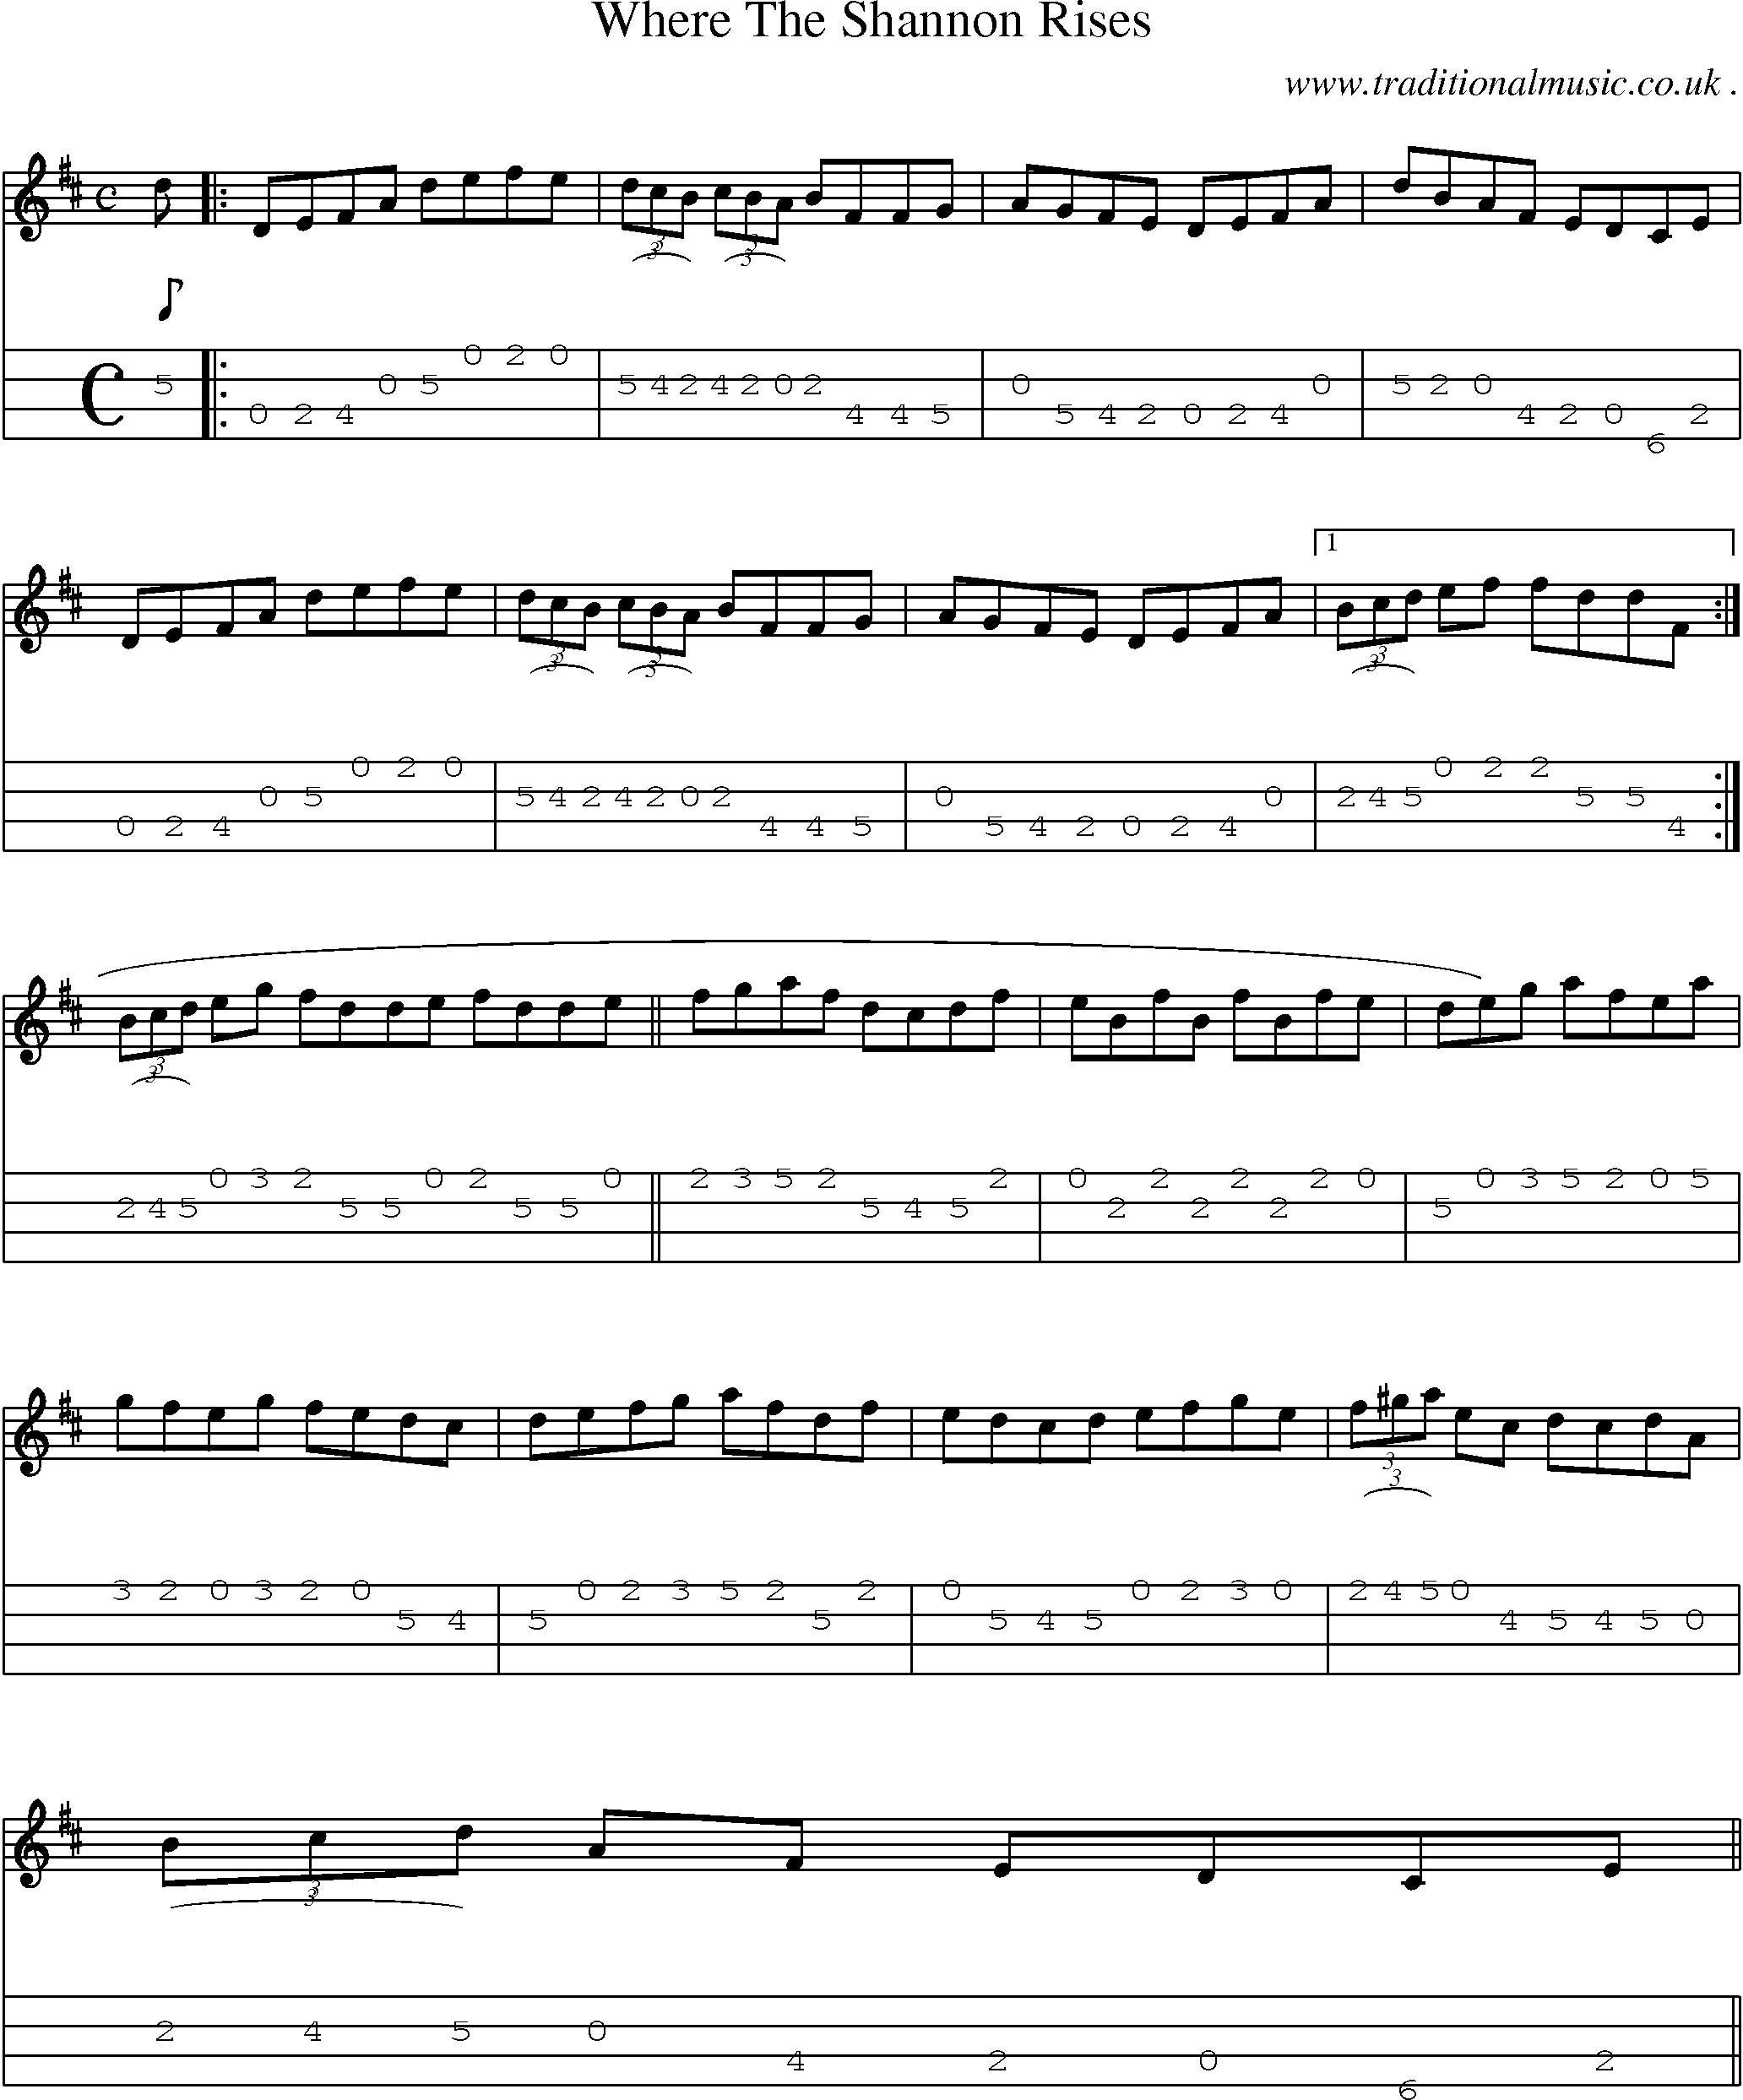 Sheet-Music and Mandolin Tabs for Where The Shannon Rises